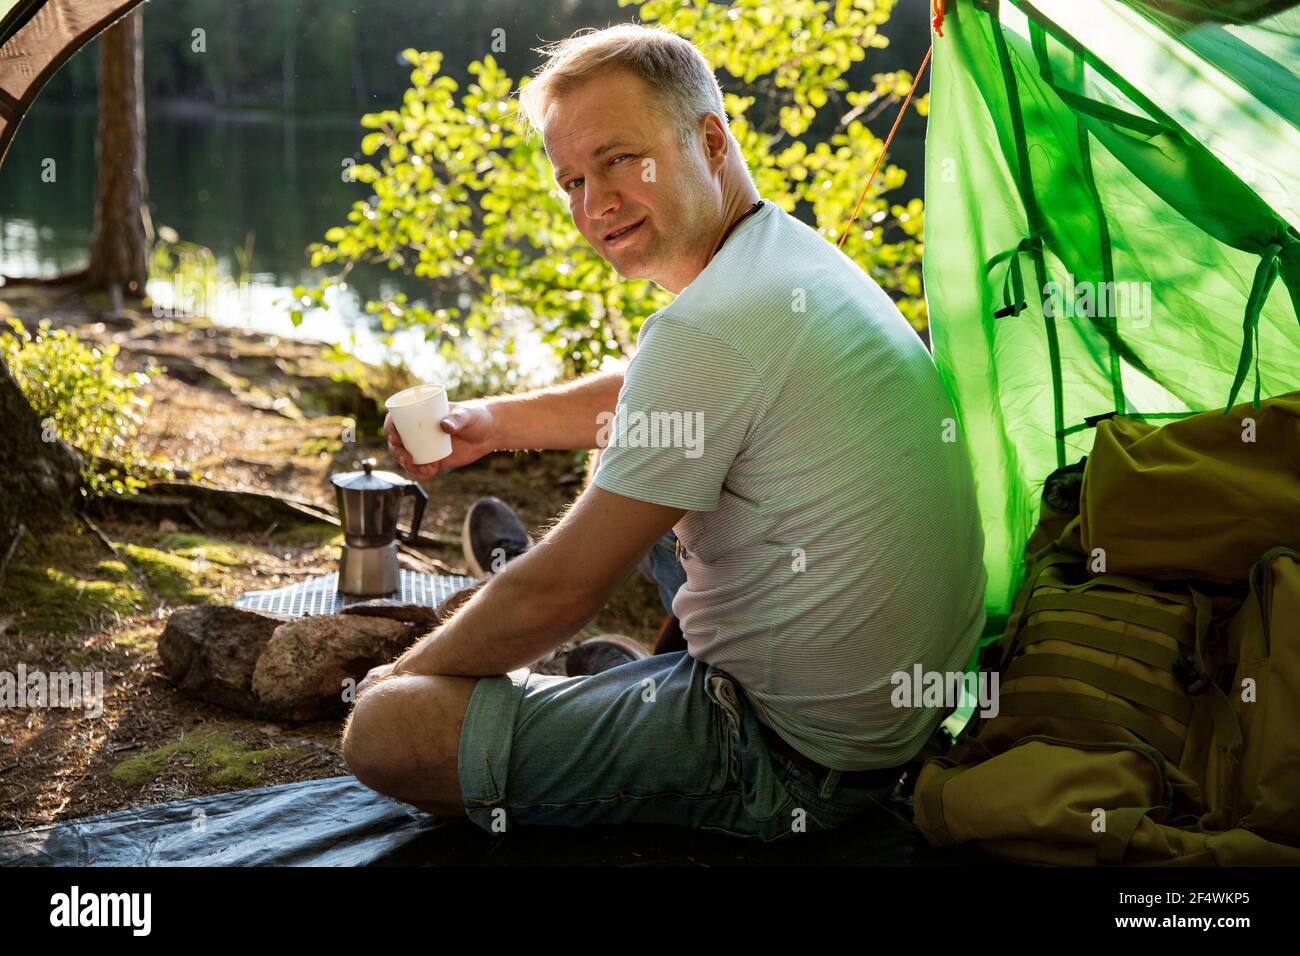 Man making coffee using espresso maker on campfire in forest on shore of a lake, sitting in tent, making a fire, grilling. Happy isolation concept. Stock Photo